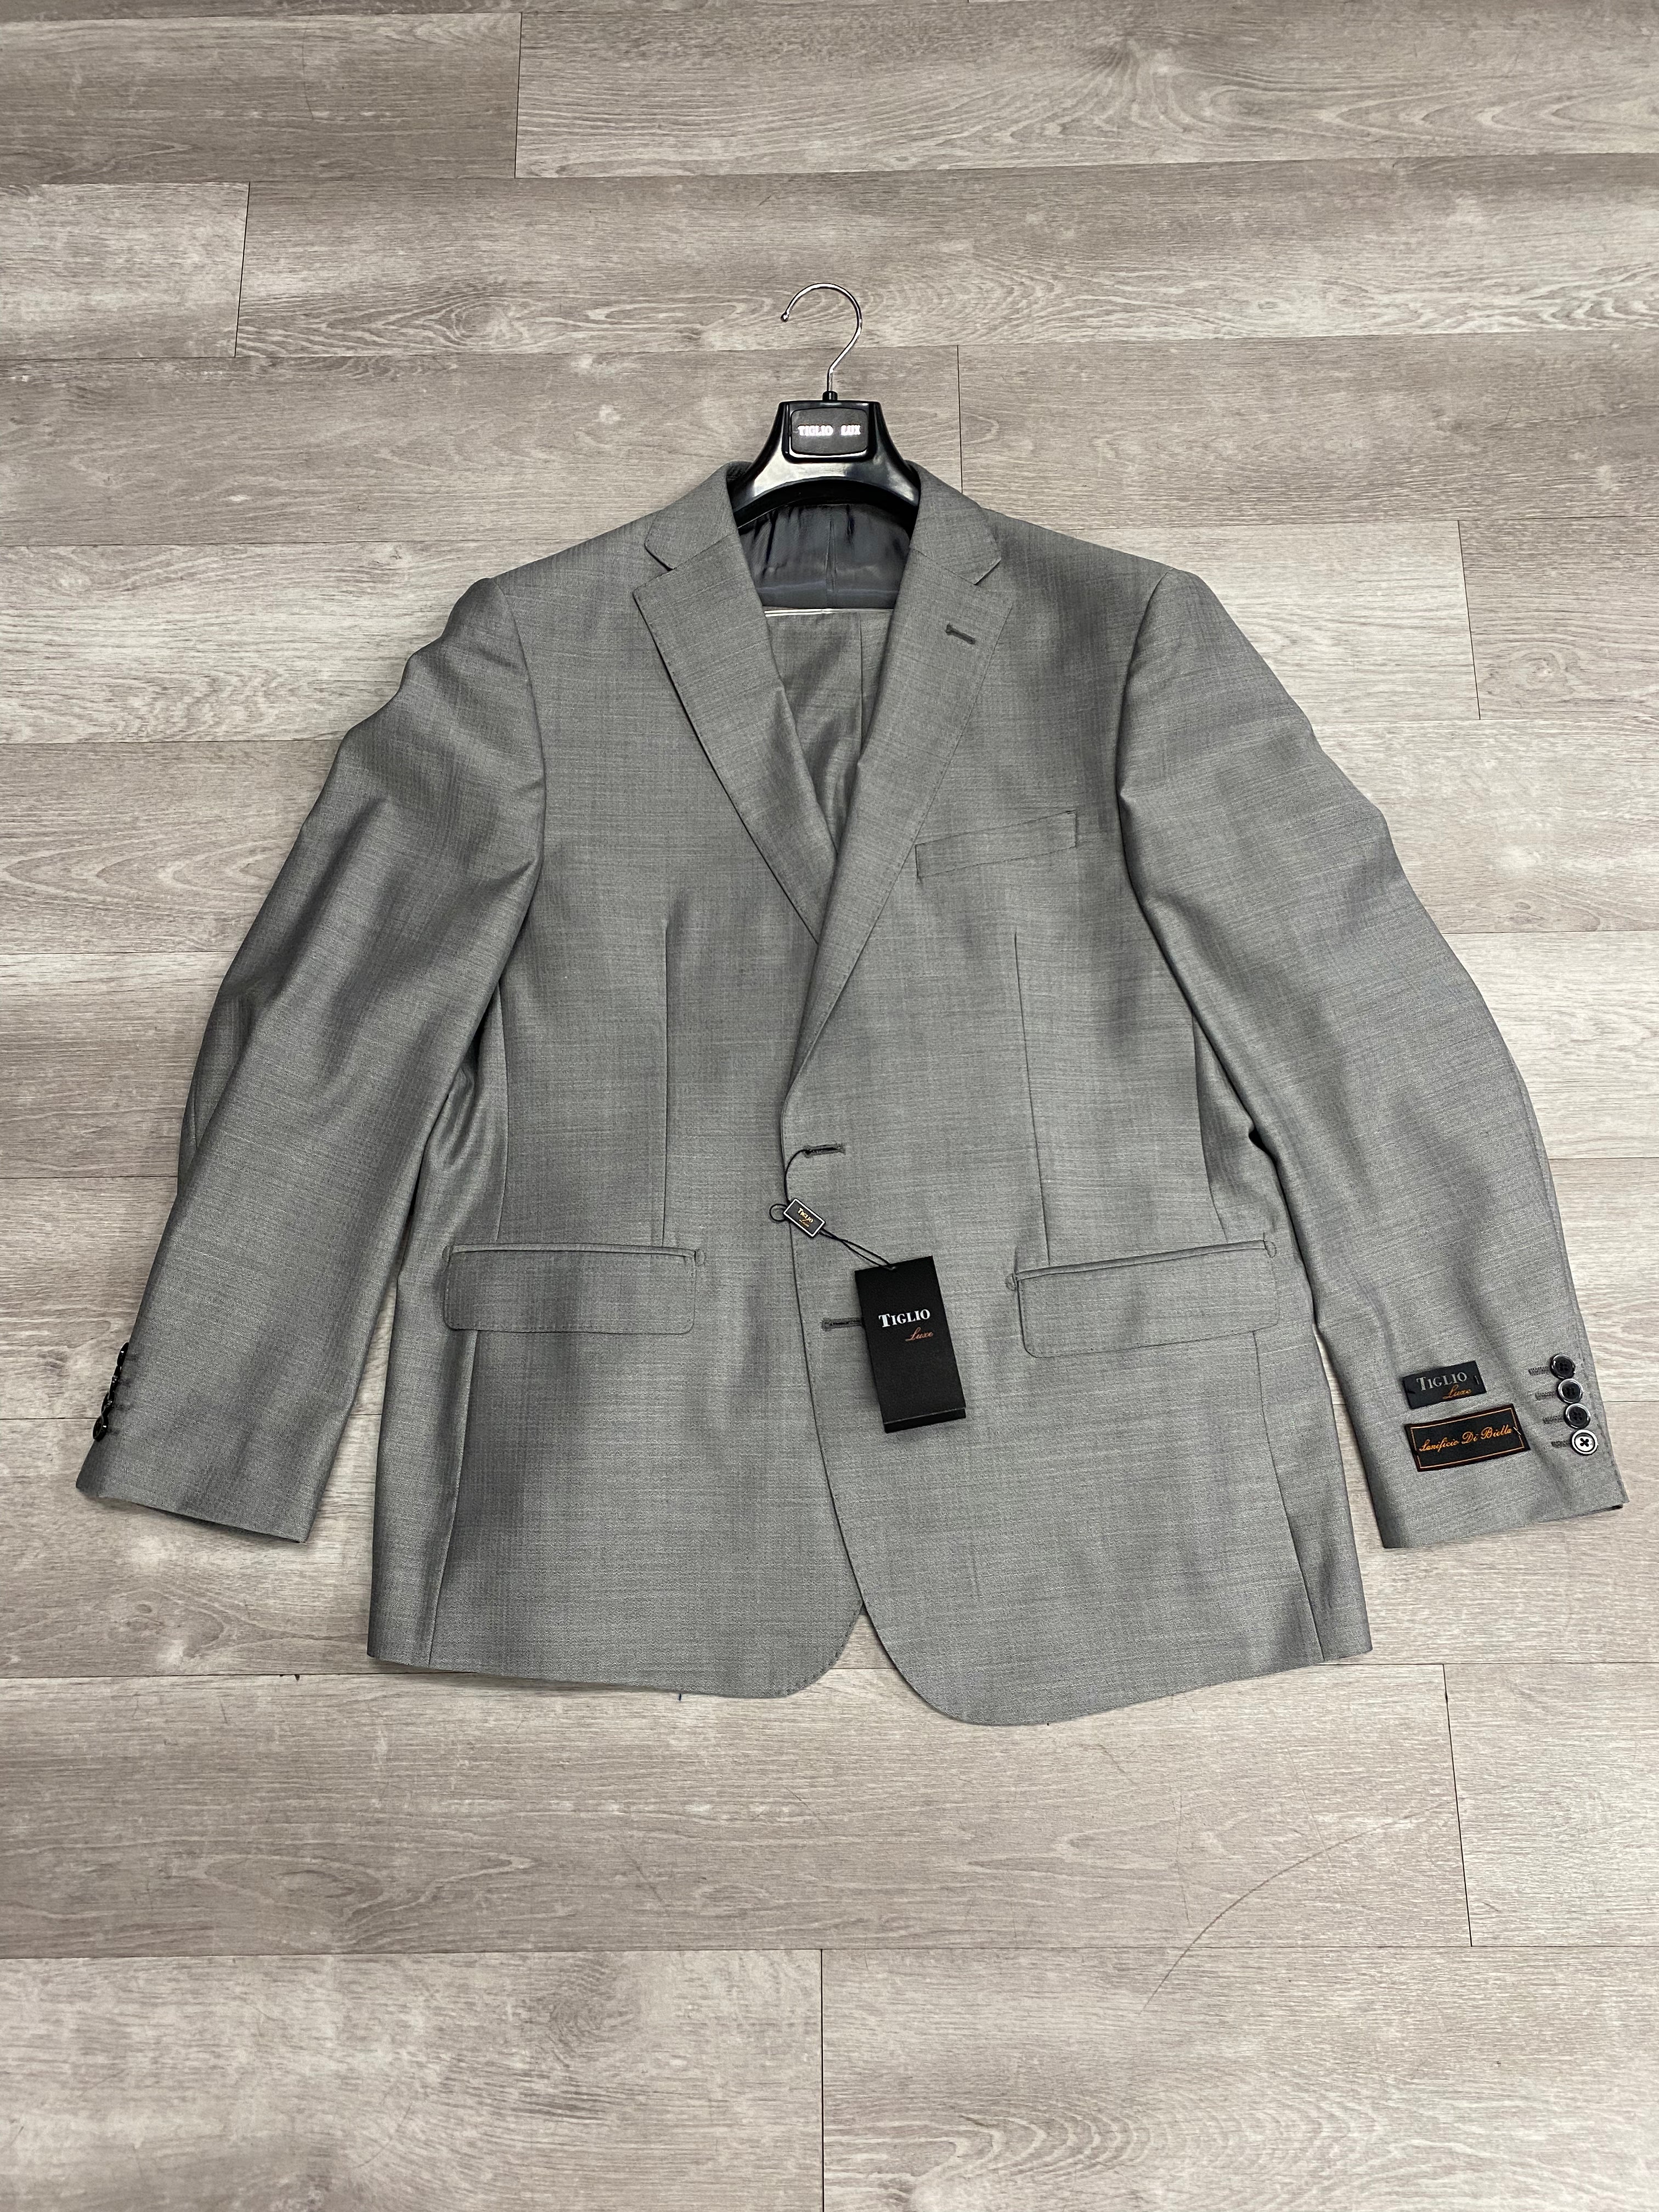 Tiglio Luxe Novello Slim Fit Grey Suit 12A005 (SIZE 56L ONLY)